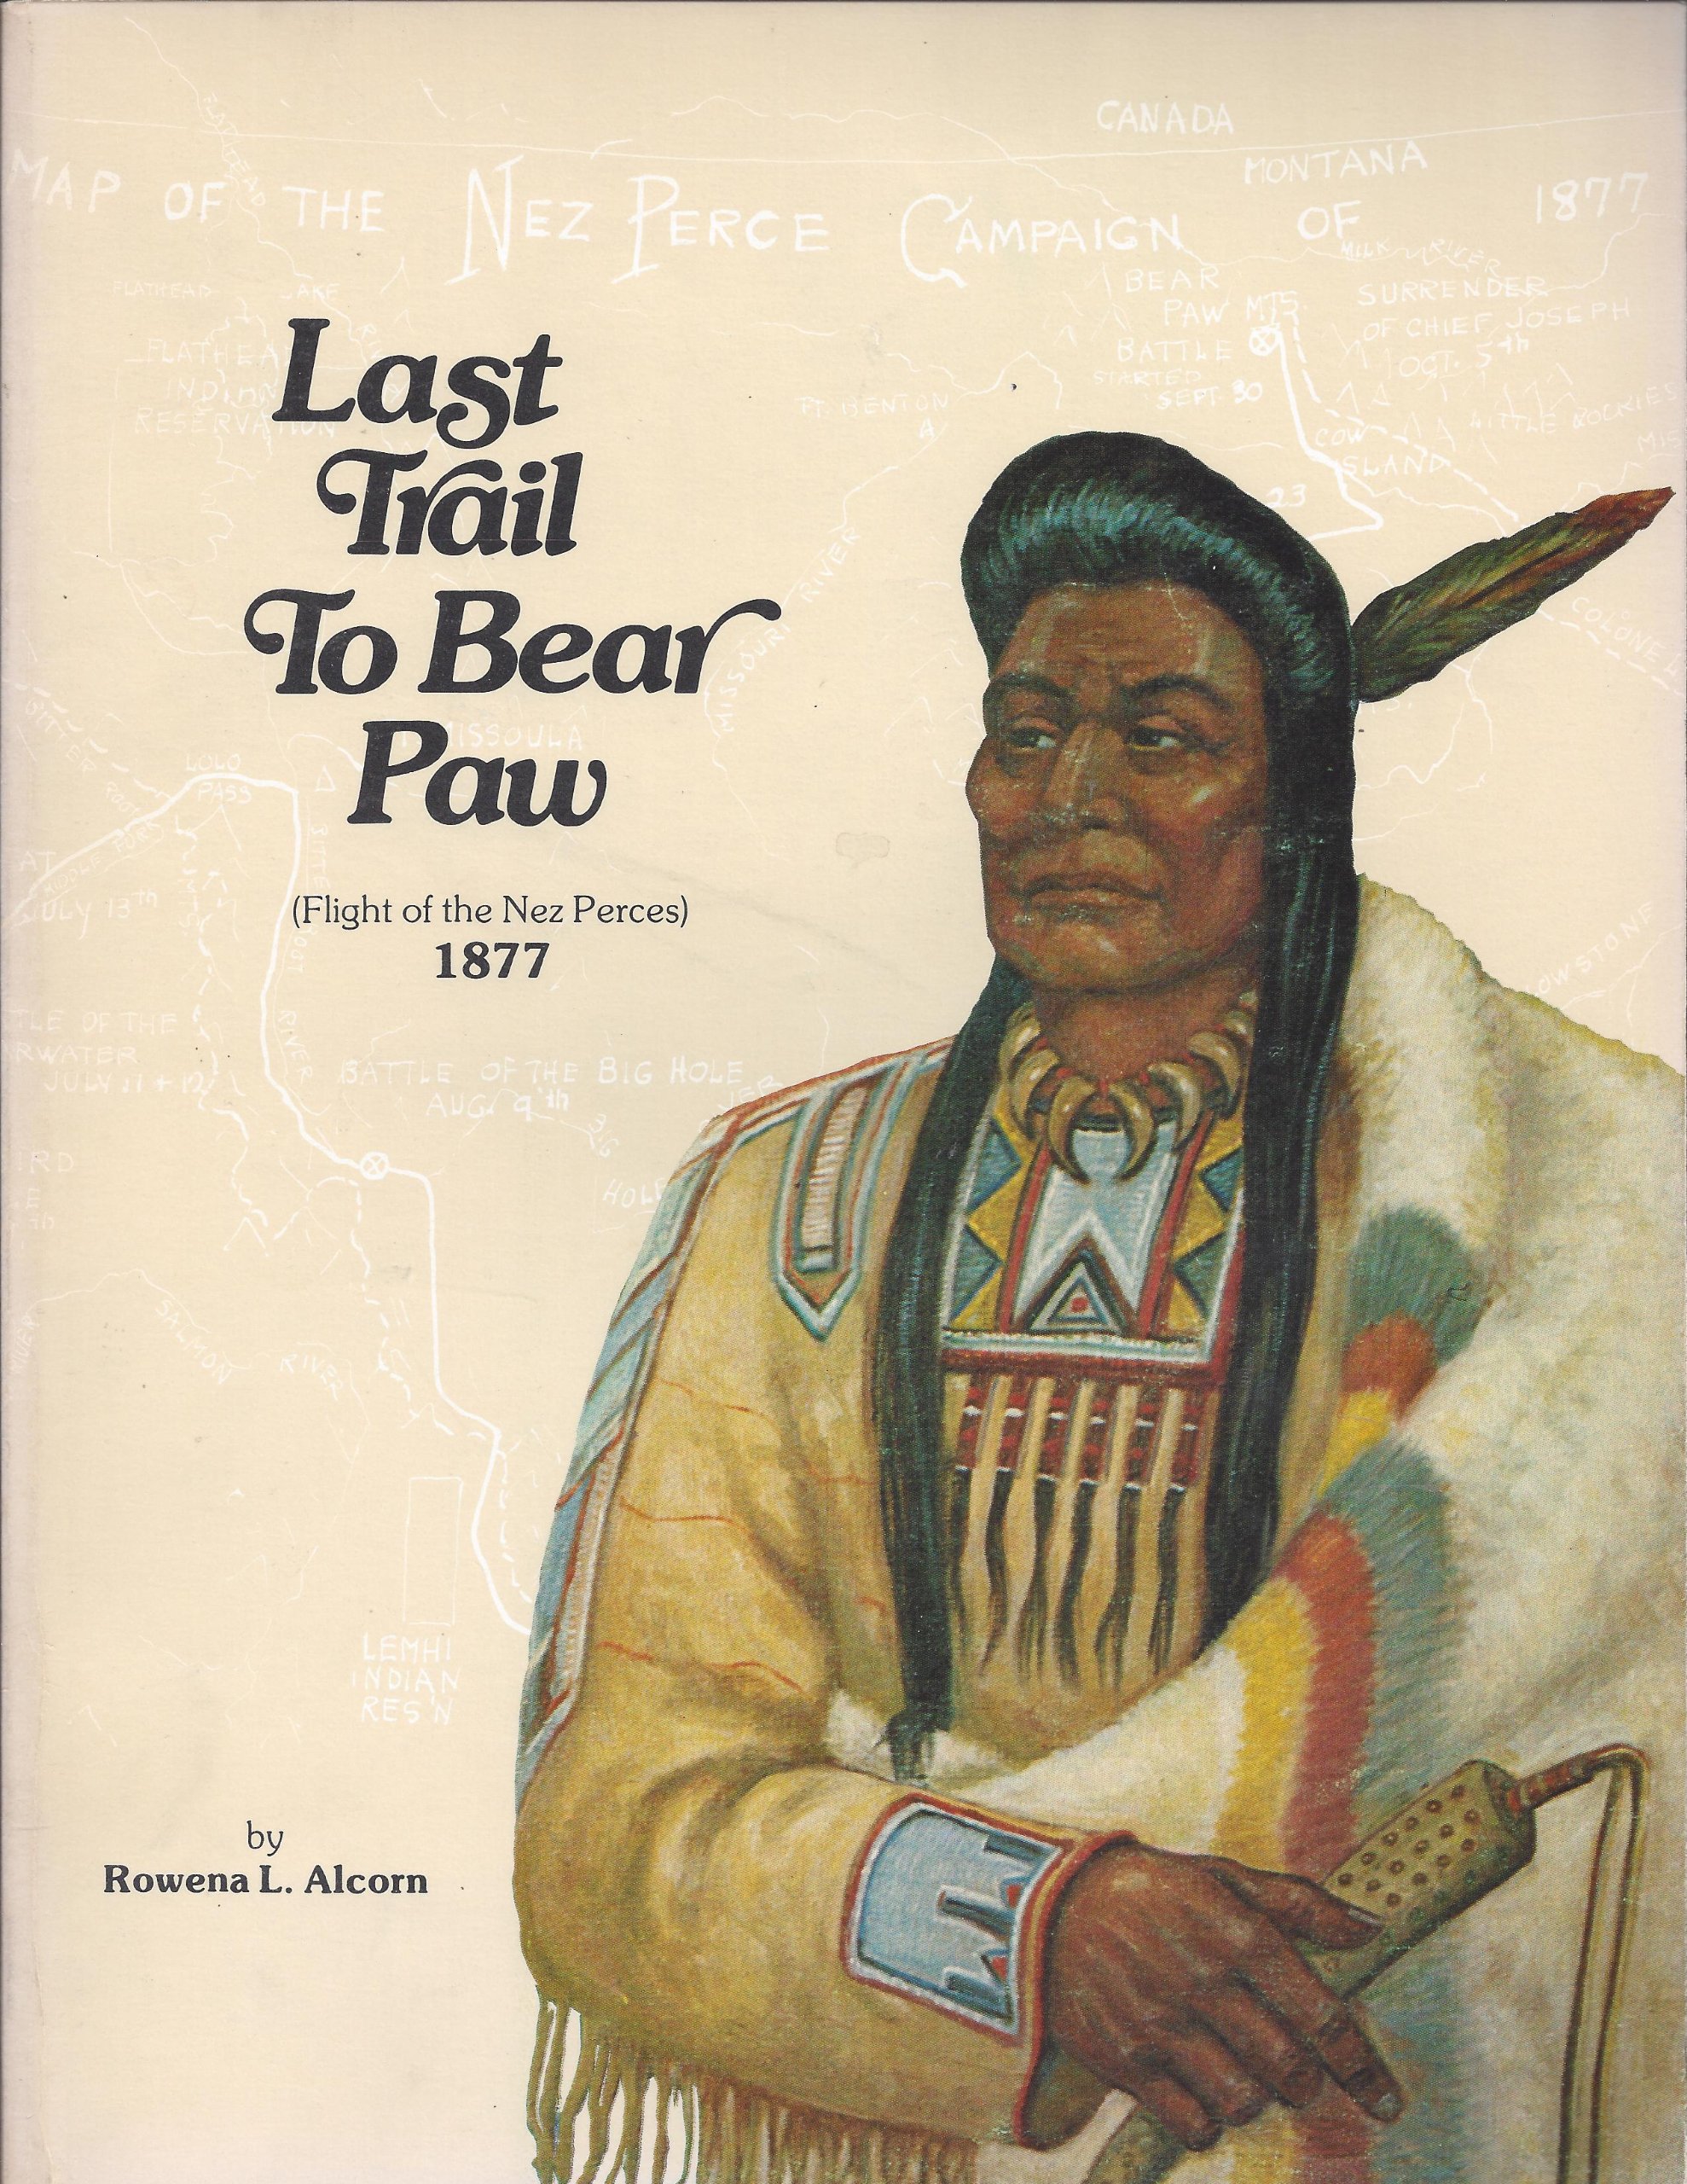 Last trail to Bear Paw: Flight of the Nez Perces, 1877 (book cover)